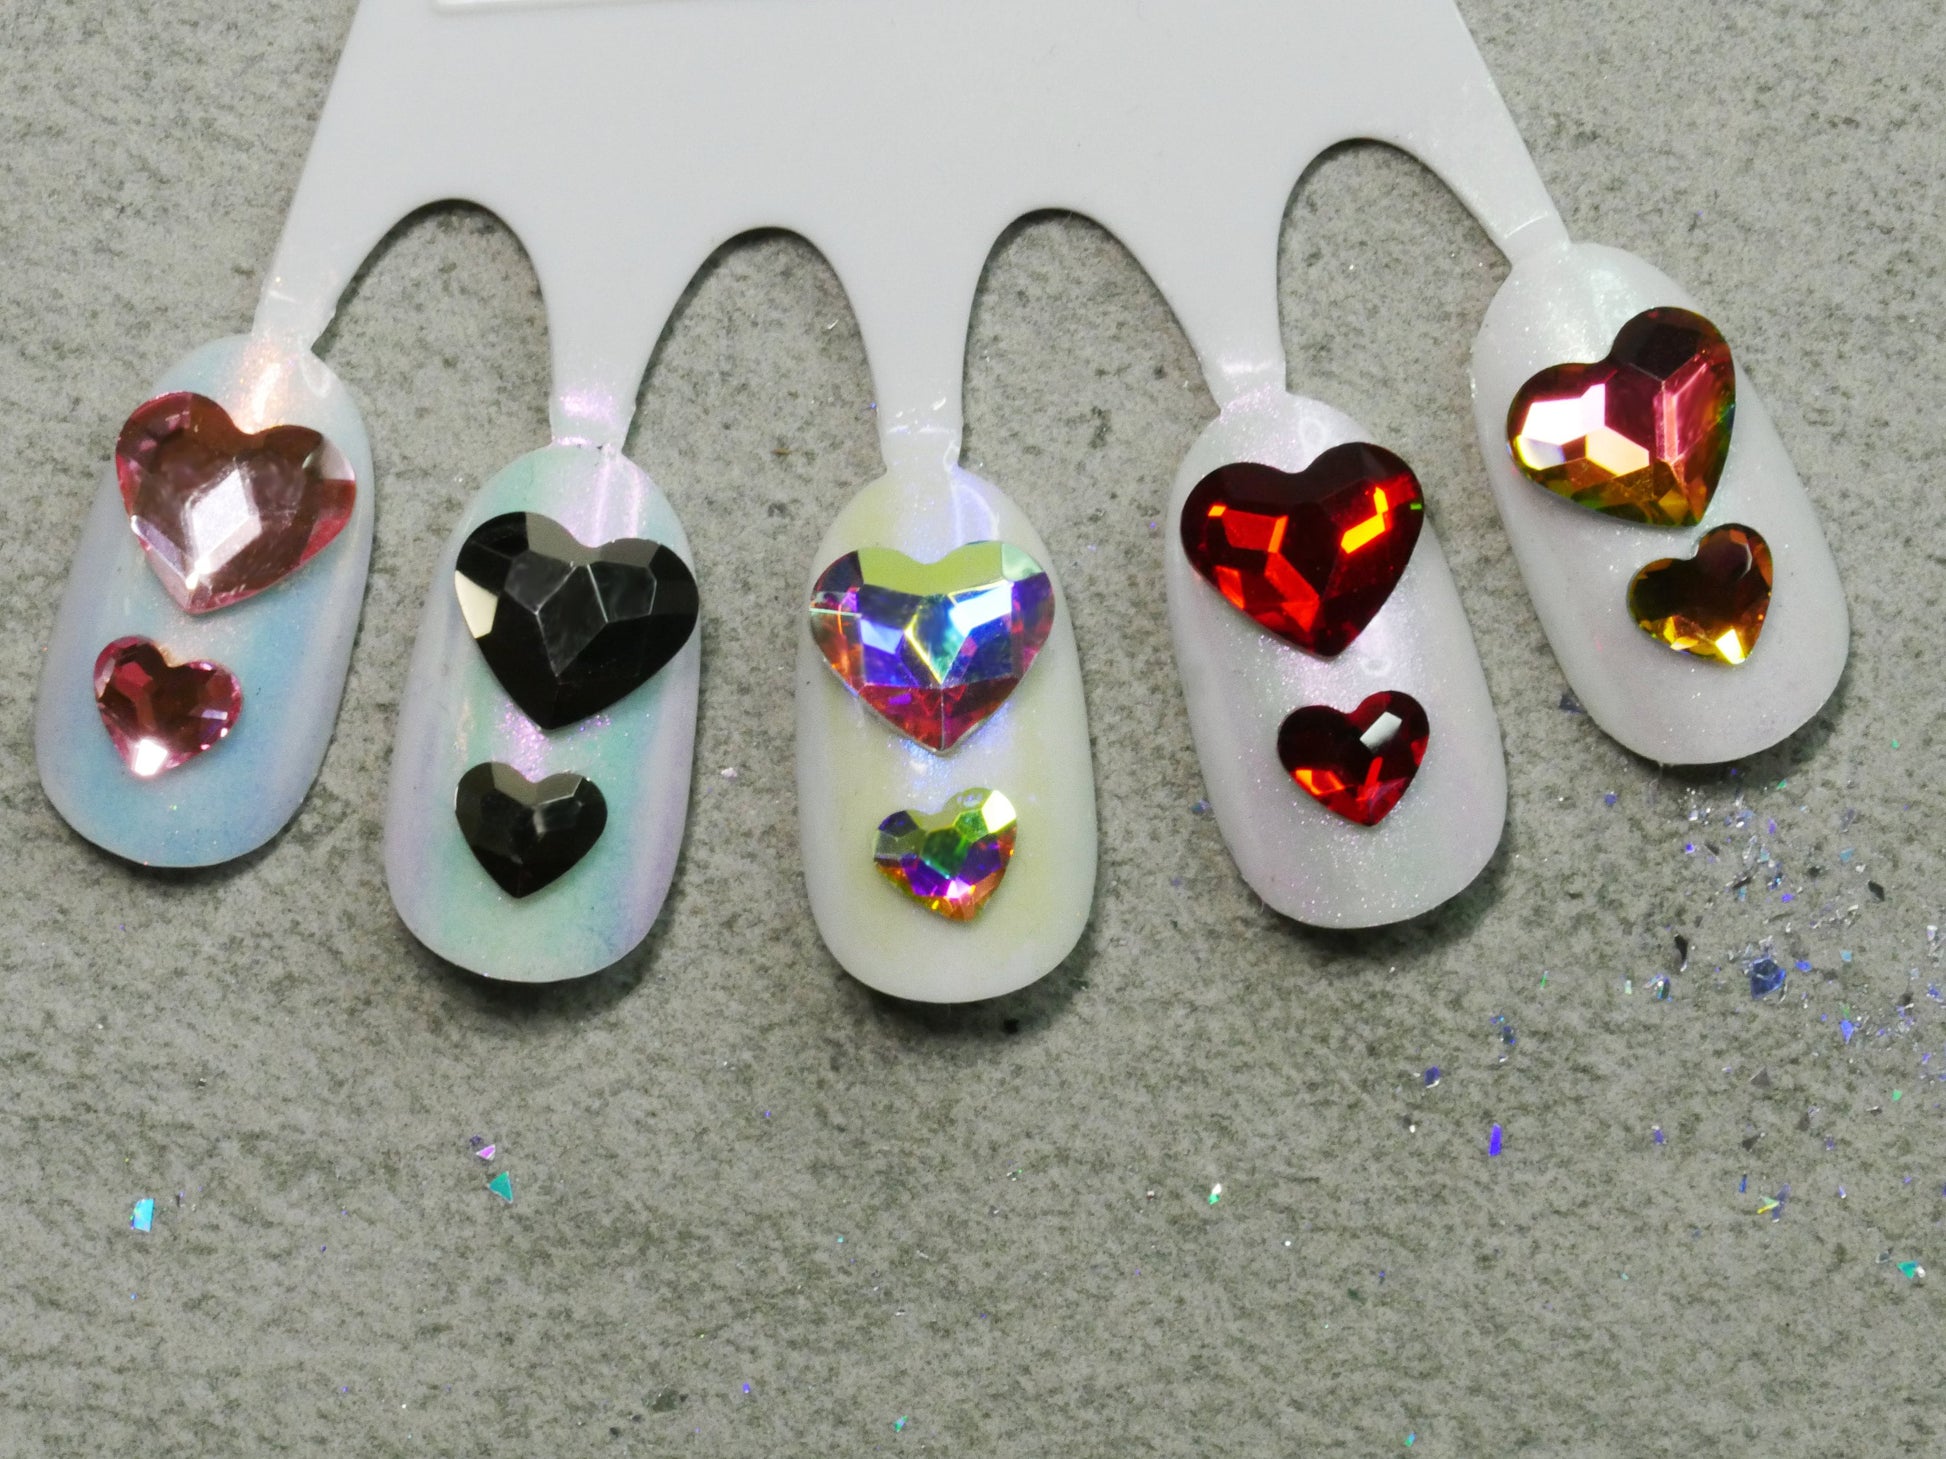 10 pcs 3D Heart Shaped Nail Charms Nail art Jewelry Accessories Decal/ Super Shine Bling Hearts Nails Supply